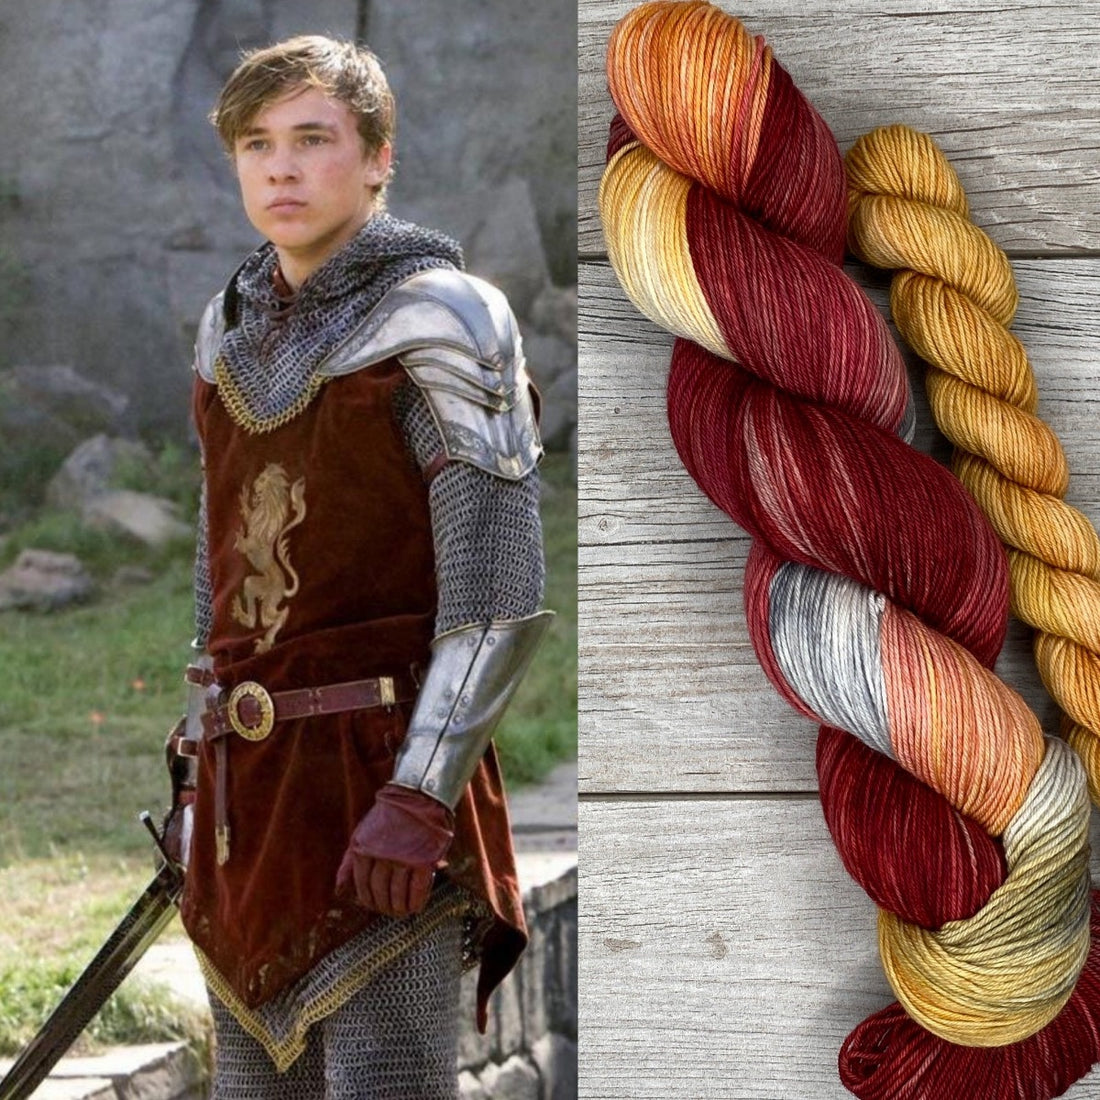 King Peter the Magnificent SOCK SET  |  Narnia Inspired  |  SHEEPISHsock  |  fingering weight